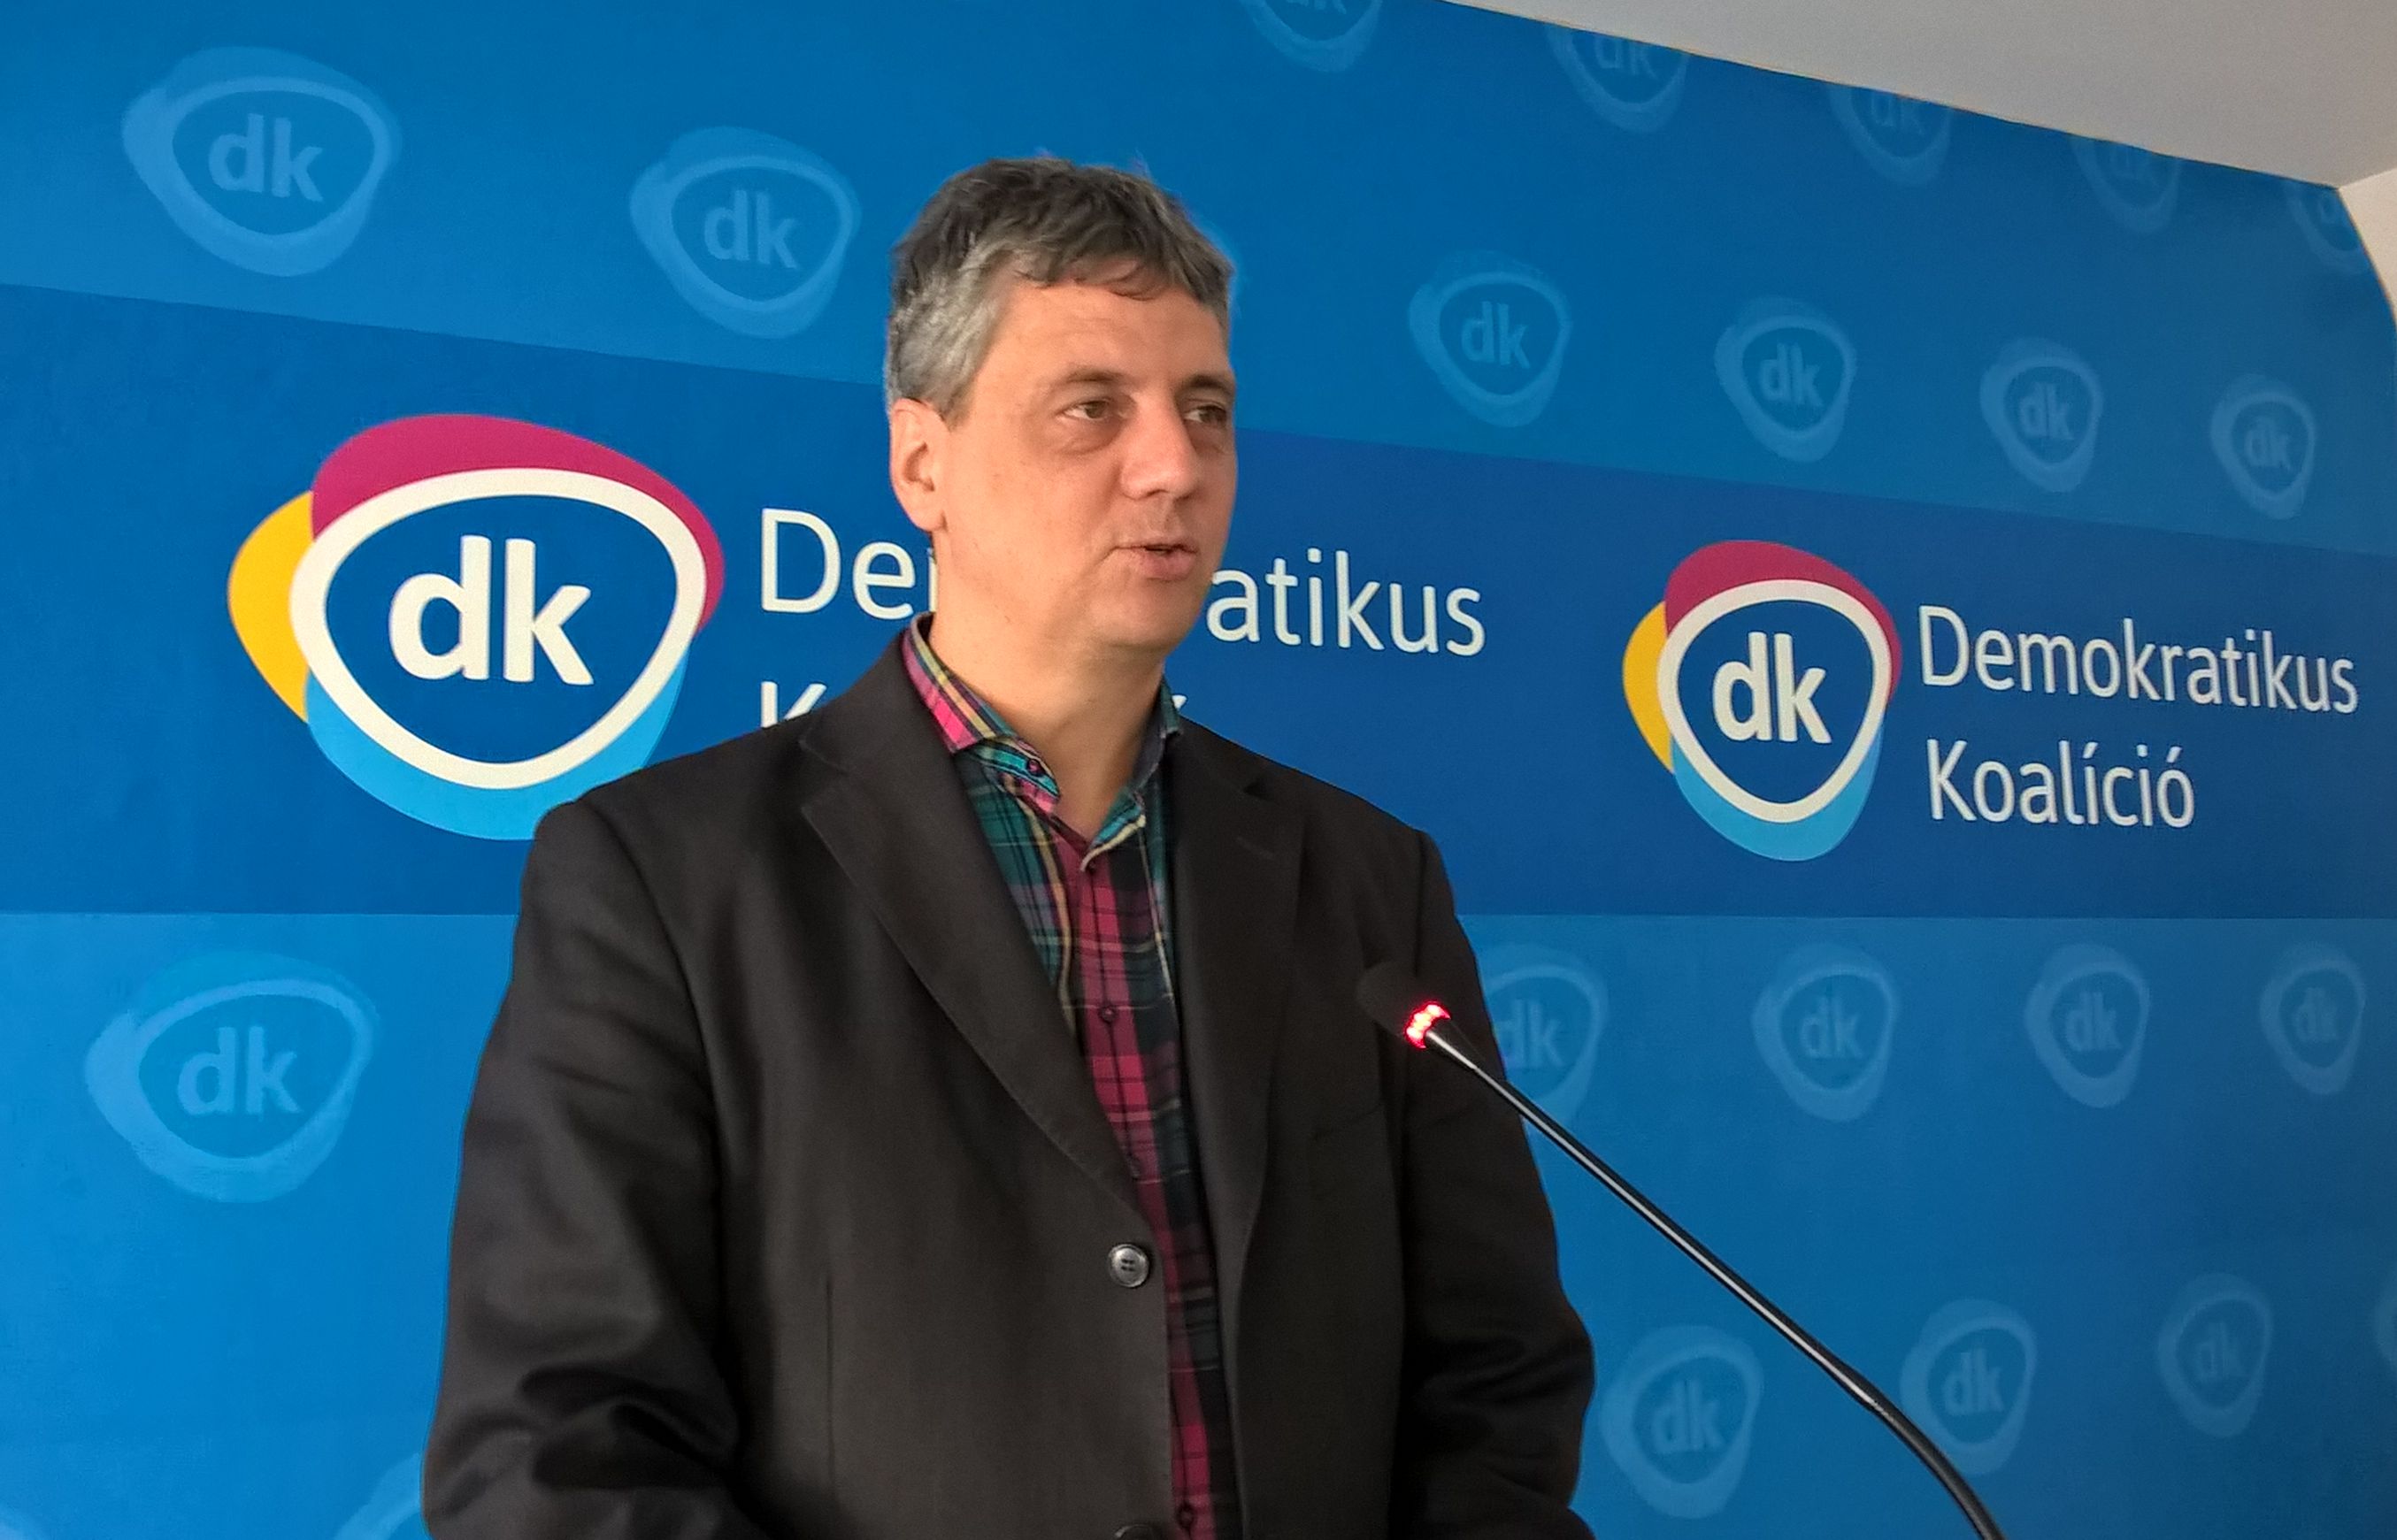 DK Wants Distribution Of Fake News By Hungarian Govt To Become Criminal Act